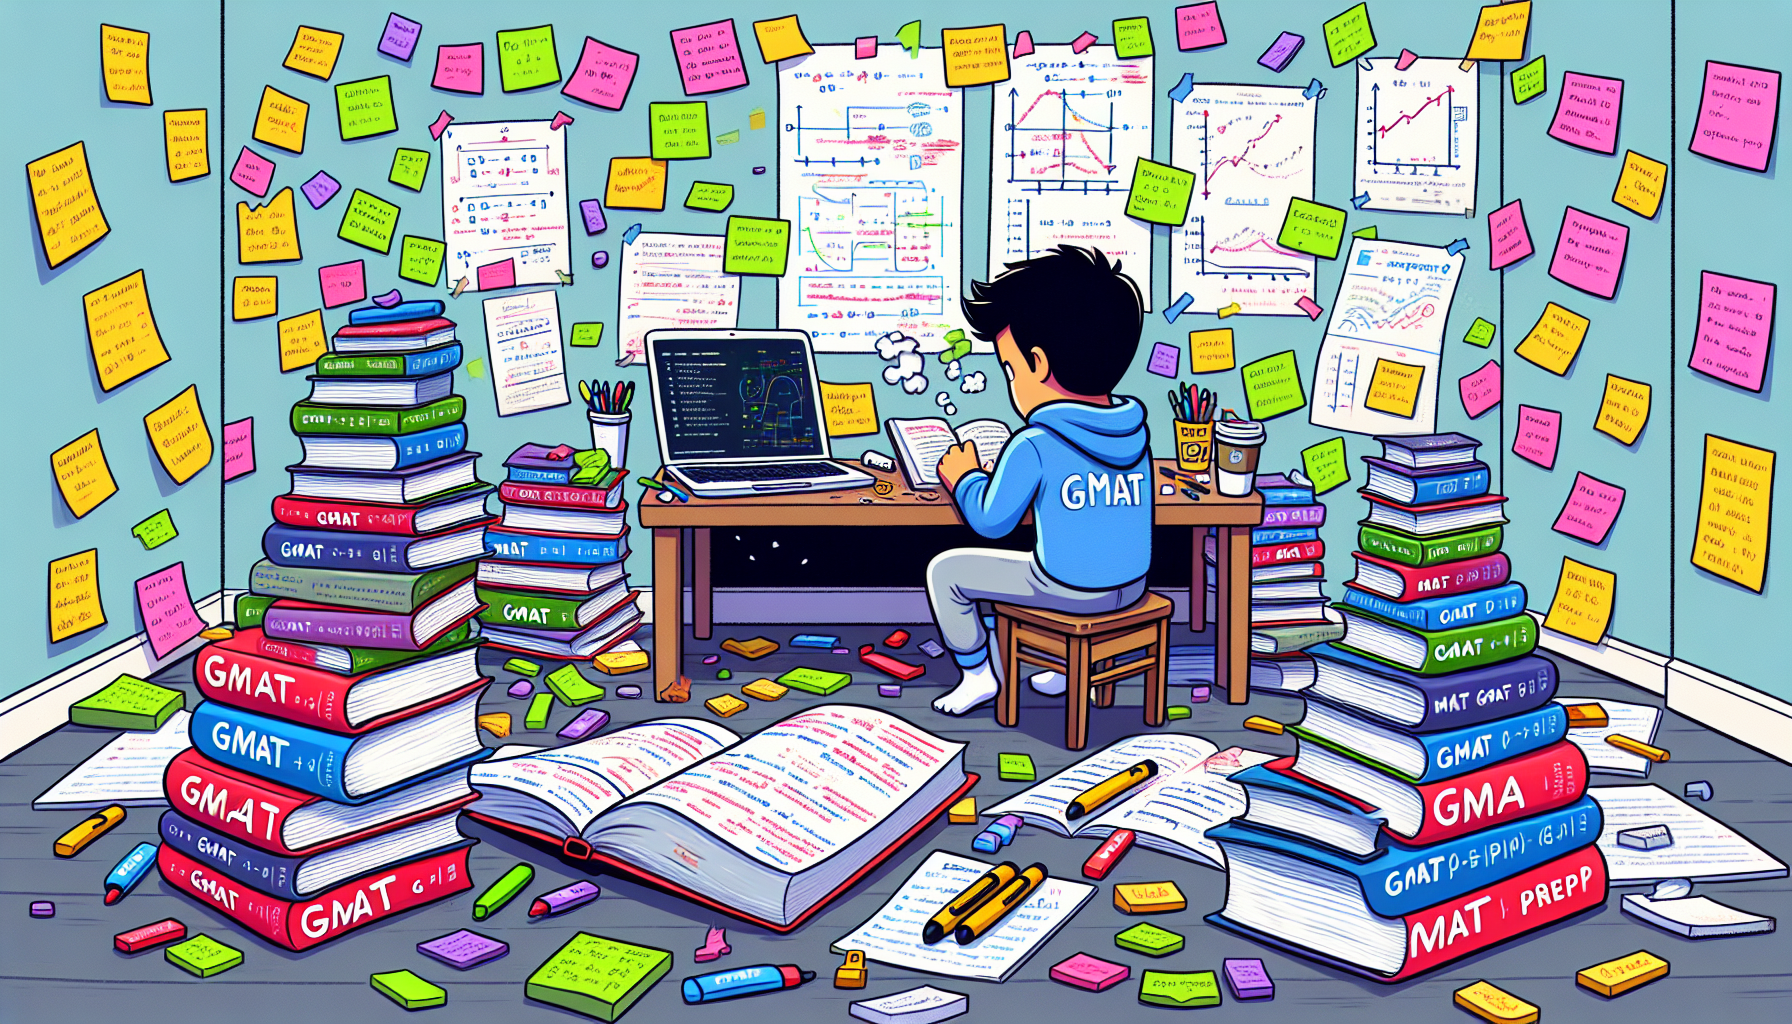 Cartoon of a person studying with GMAT books